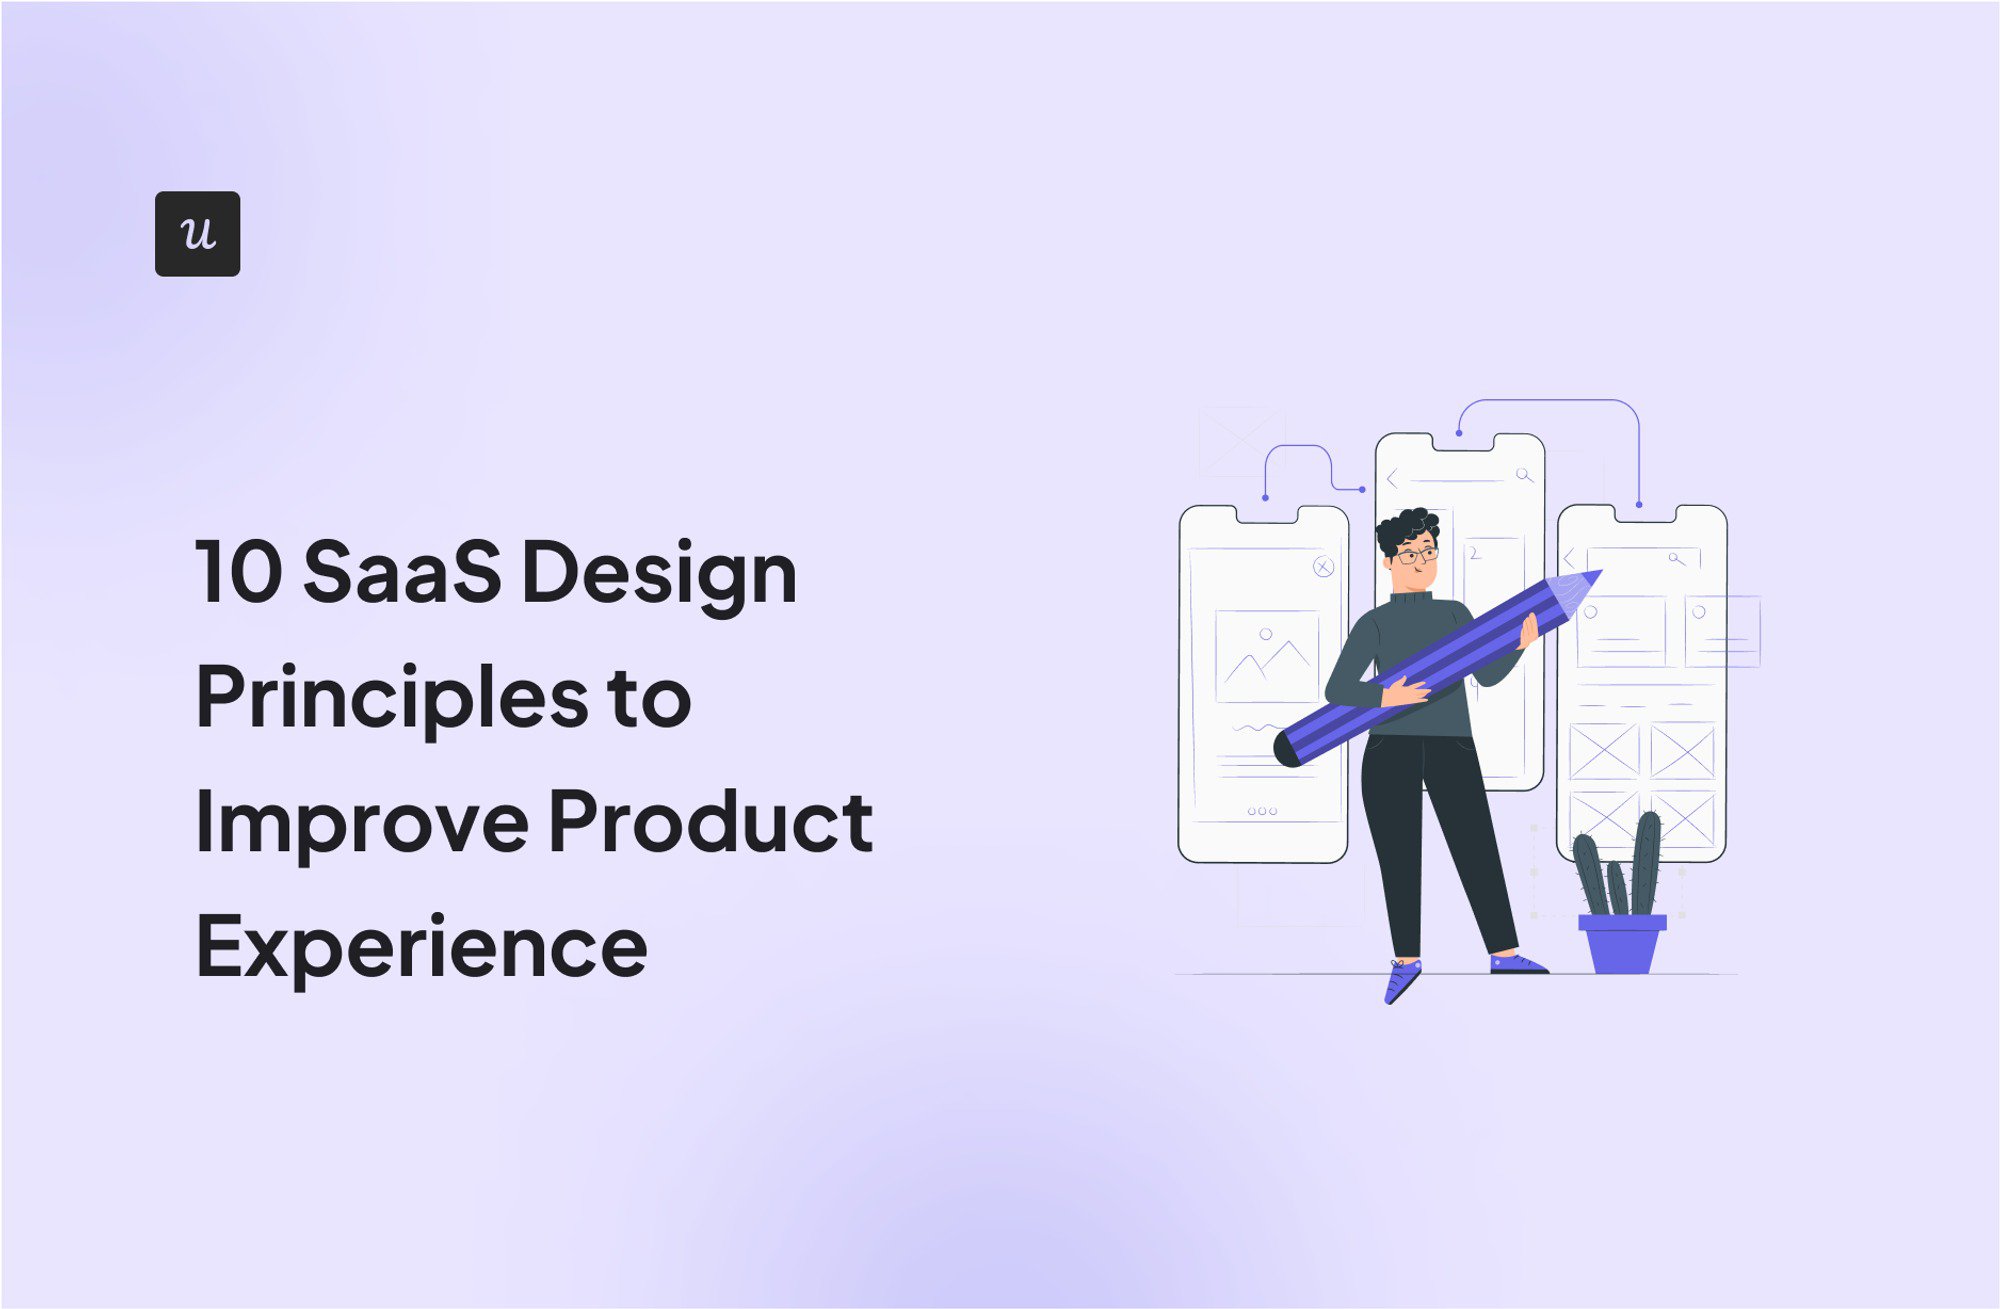 10 SaaS Design Principles to Improve Product Experience cover